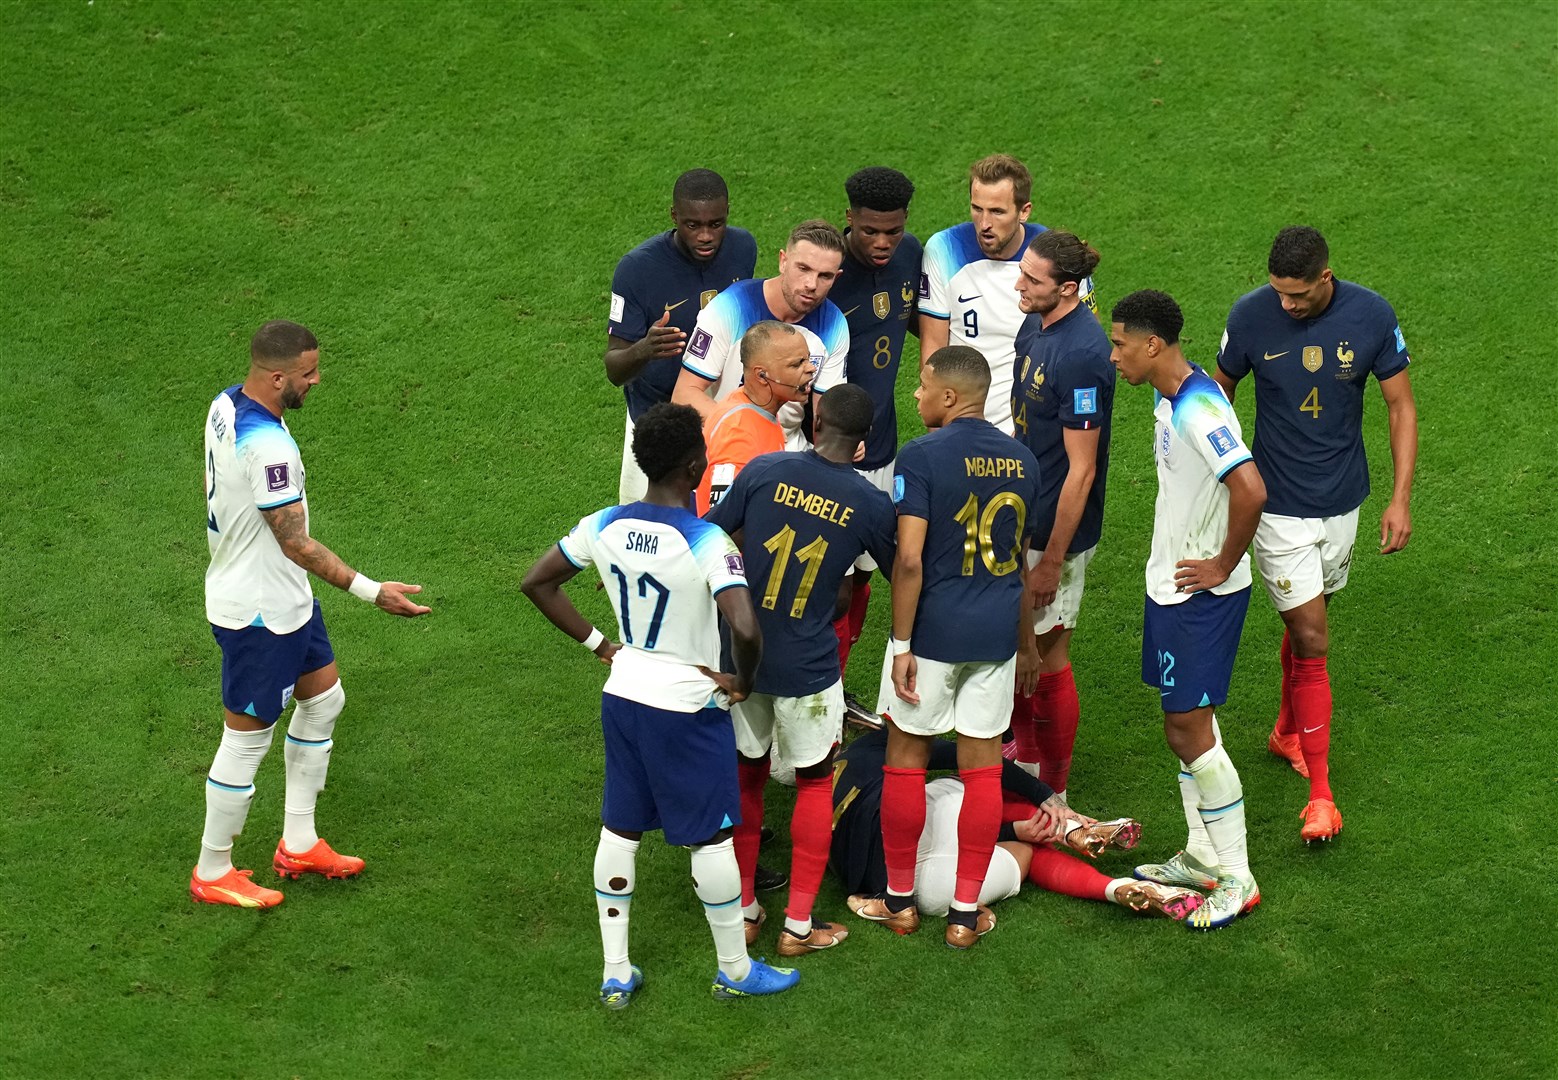 Players surround the referee during the first half (Peter Byrne/PA)